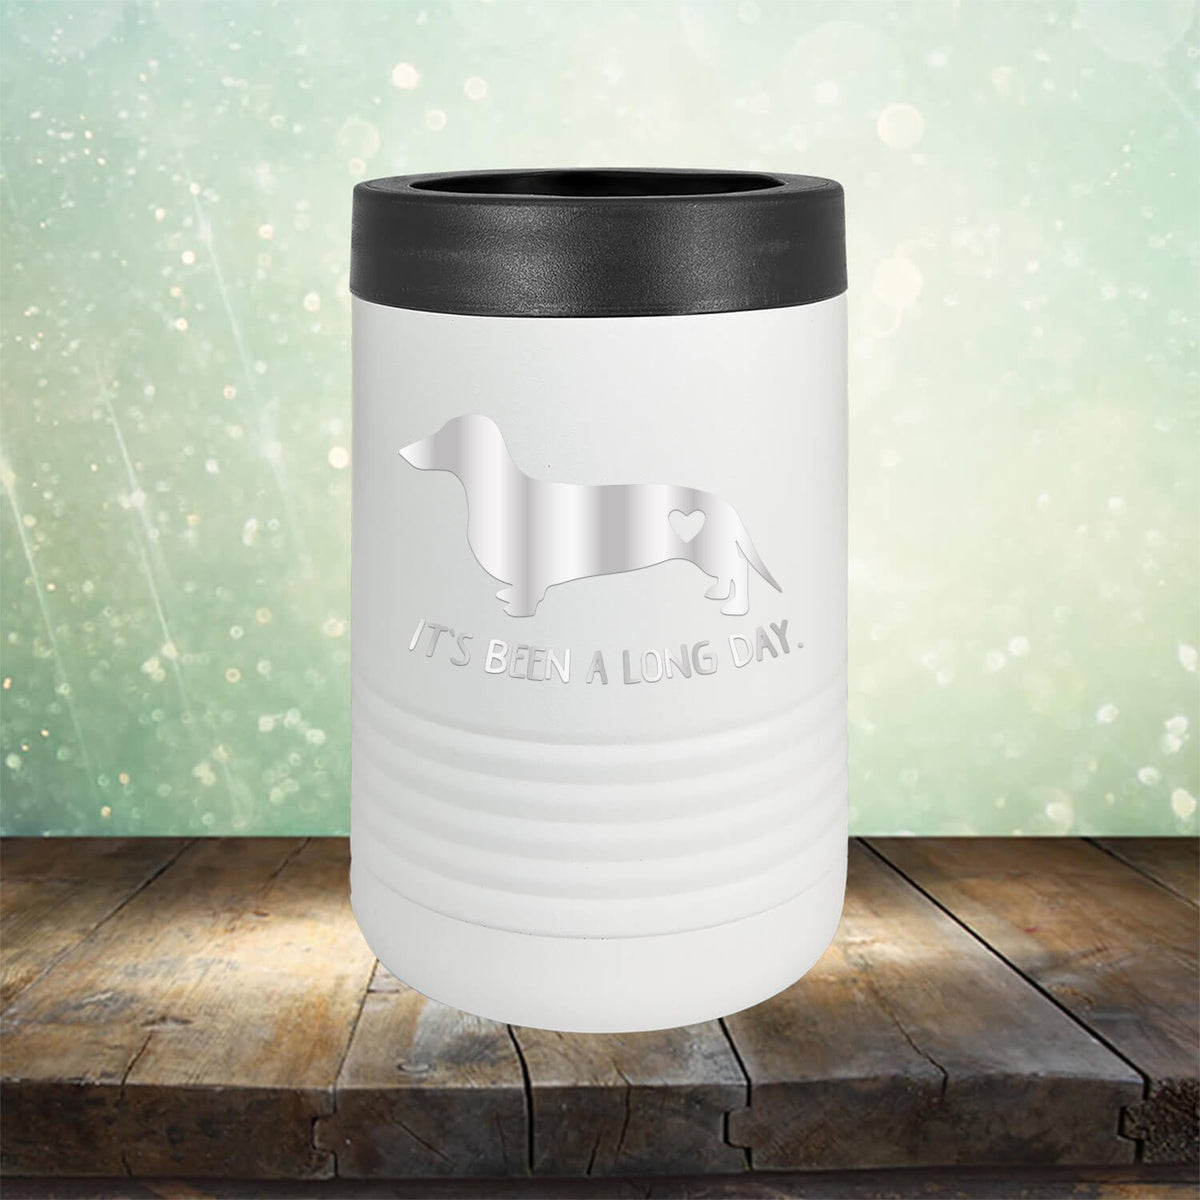 It&#39;s Been A Long Day - Laser Etched Tumbler Mug